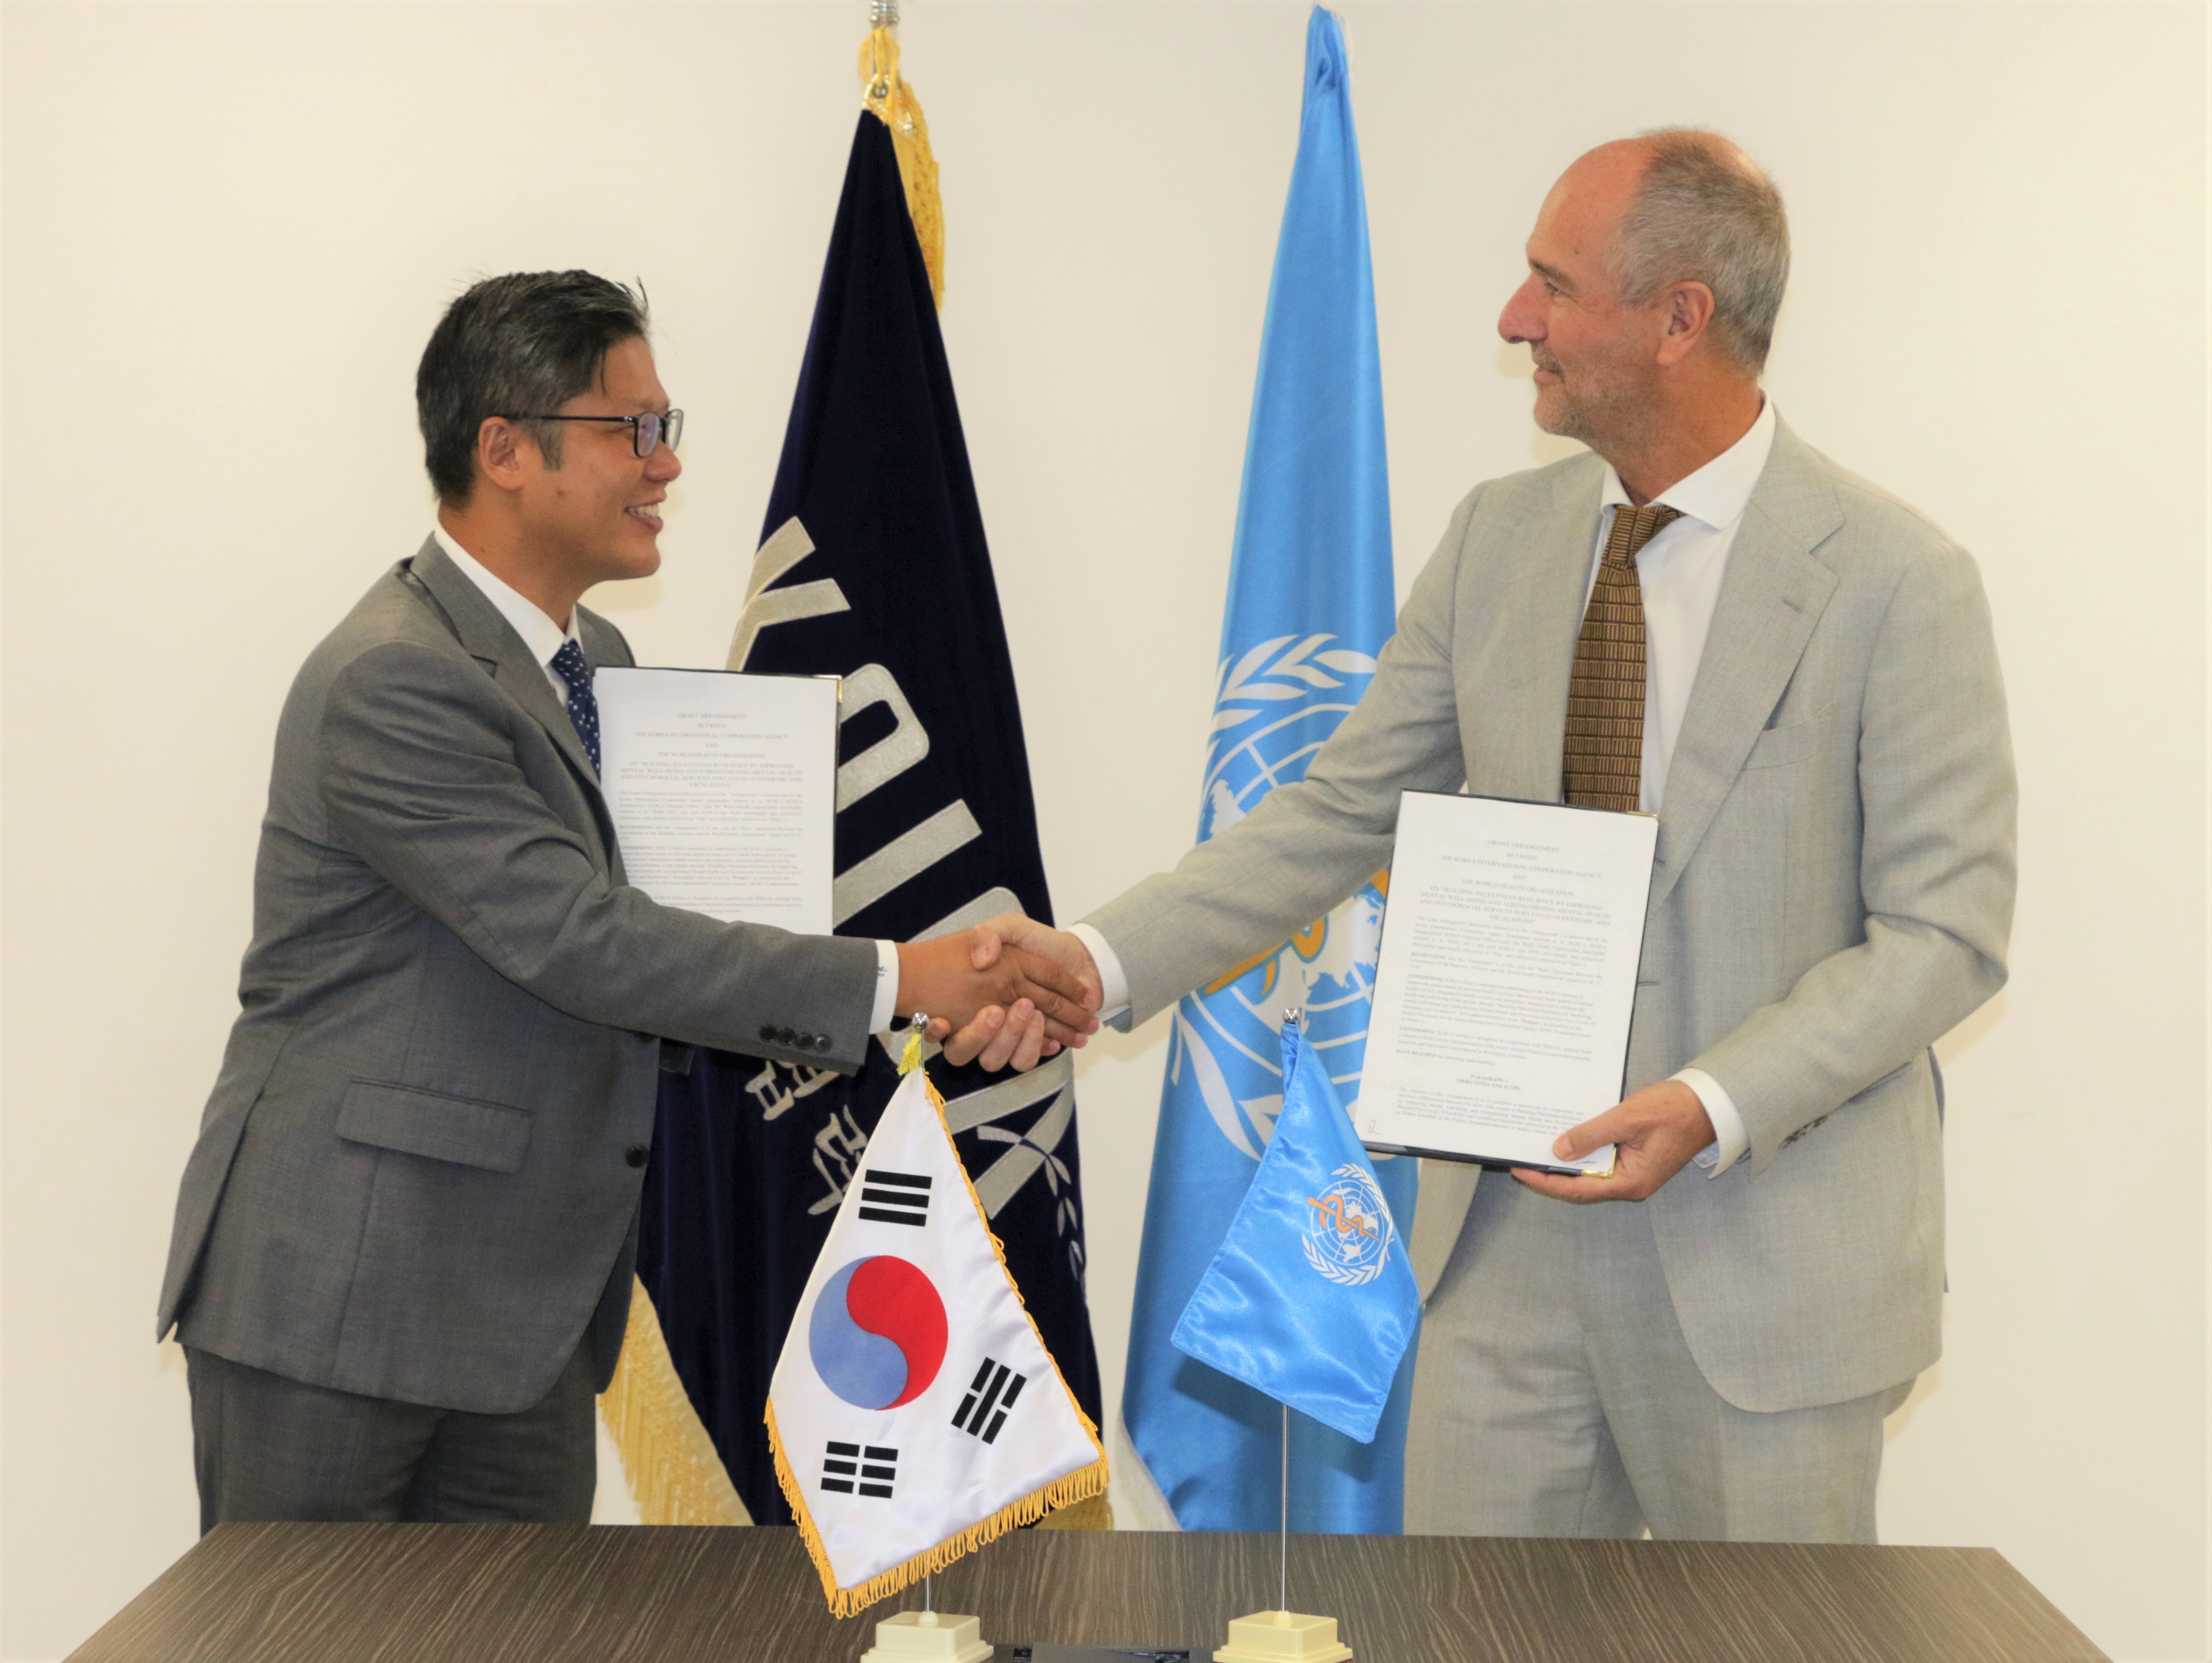 WHO and KOICA sign US$ 6 million cooperation agreement to strengthen mental health and psychosocial services in Palestine